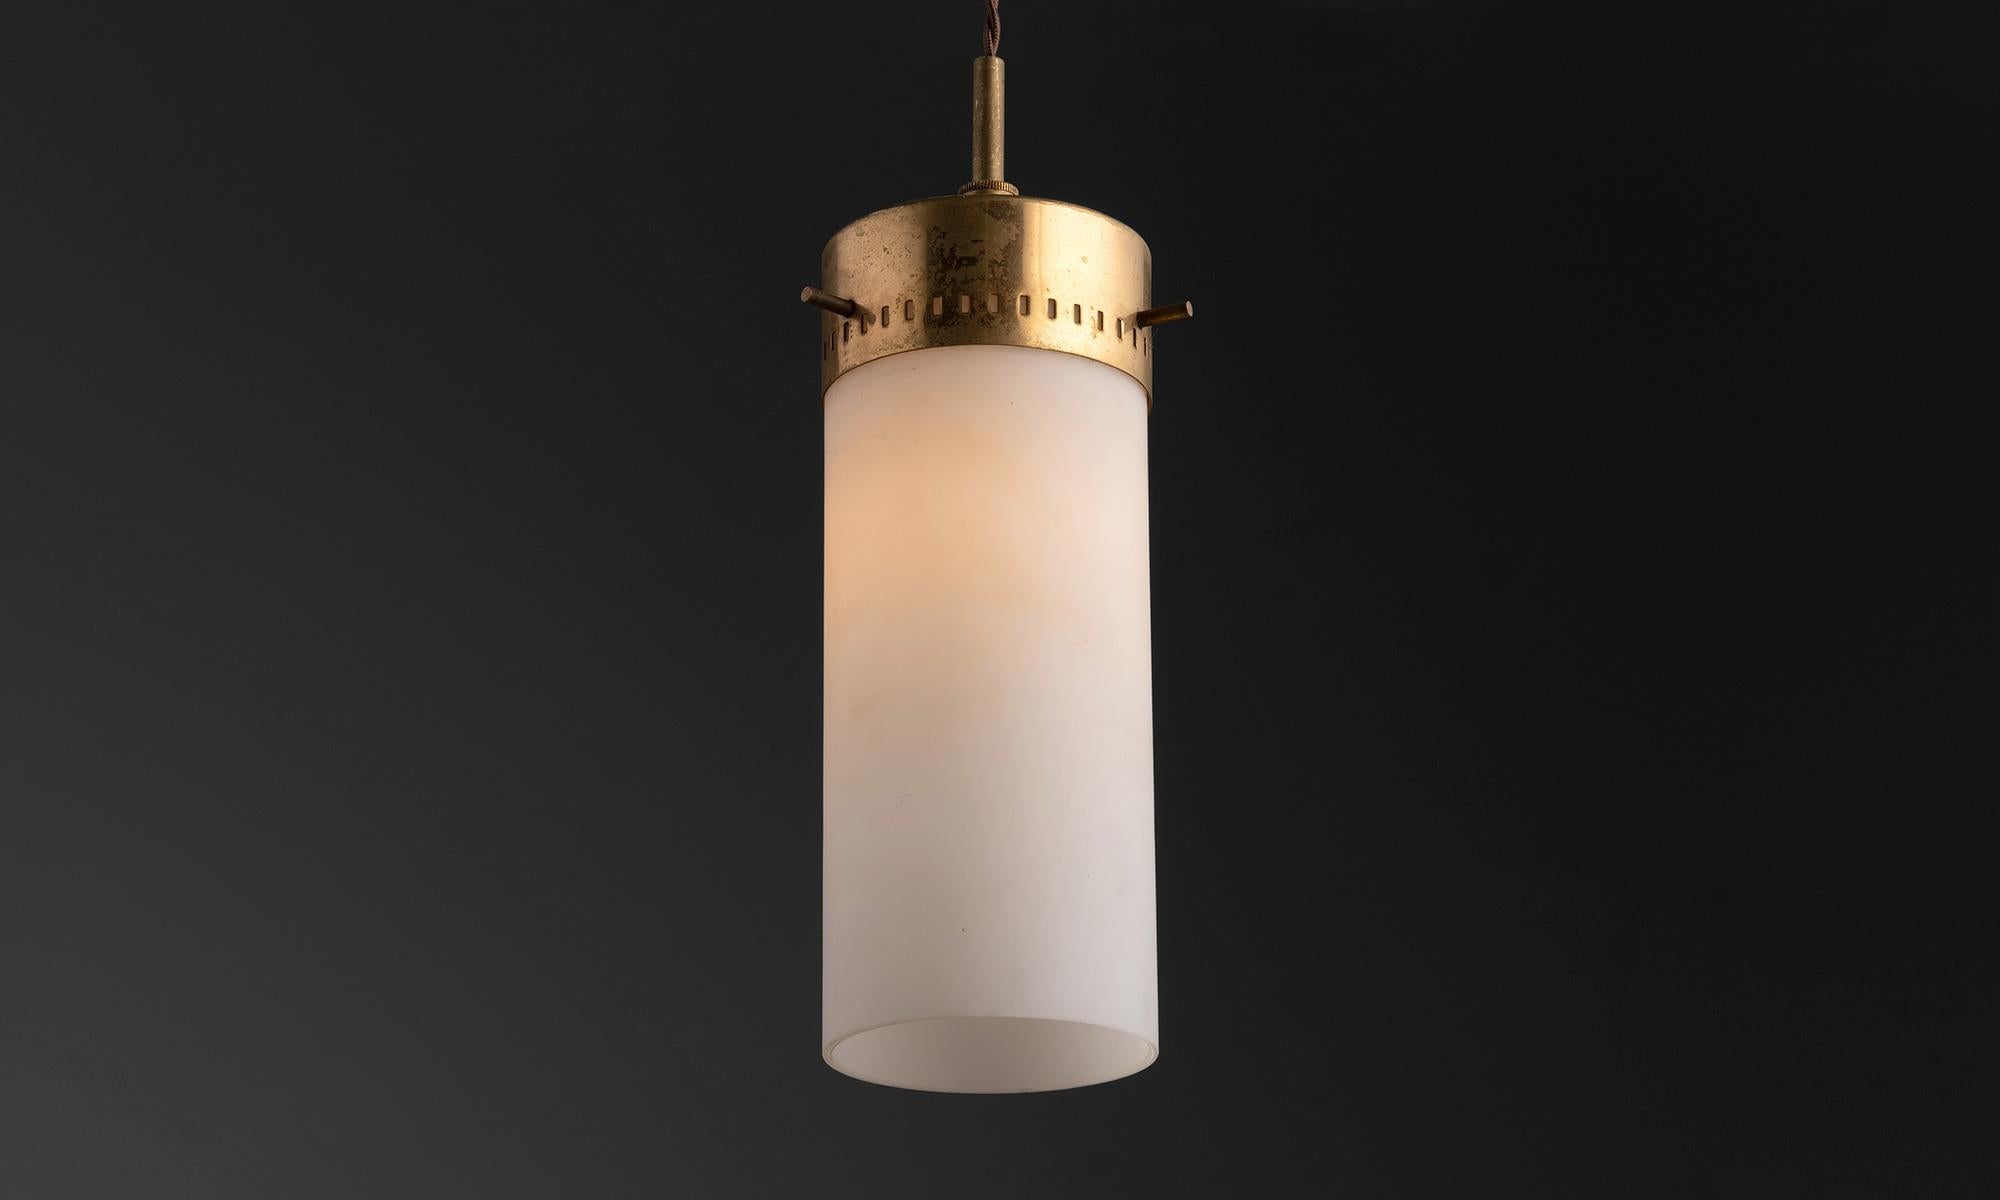 *Please note the price is per unit, and the lights are sold individually*

Cylindrical Modern Glass and Brass Pendant

Opaline glass shades with elegant brass fitter and canopy.

England Circa 1960

Measures: 4”diameter x 13.25”height.